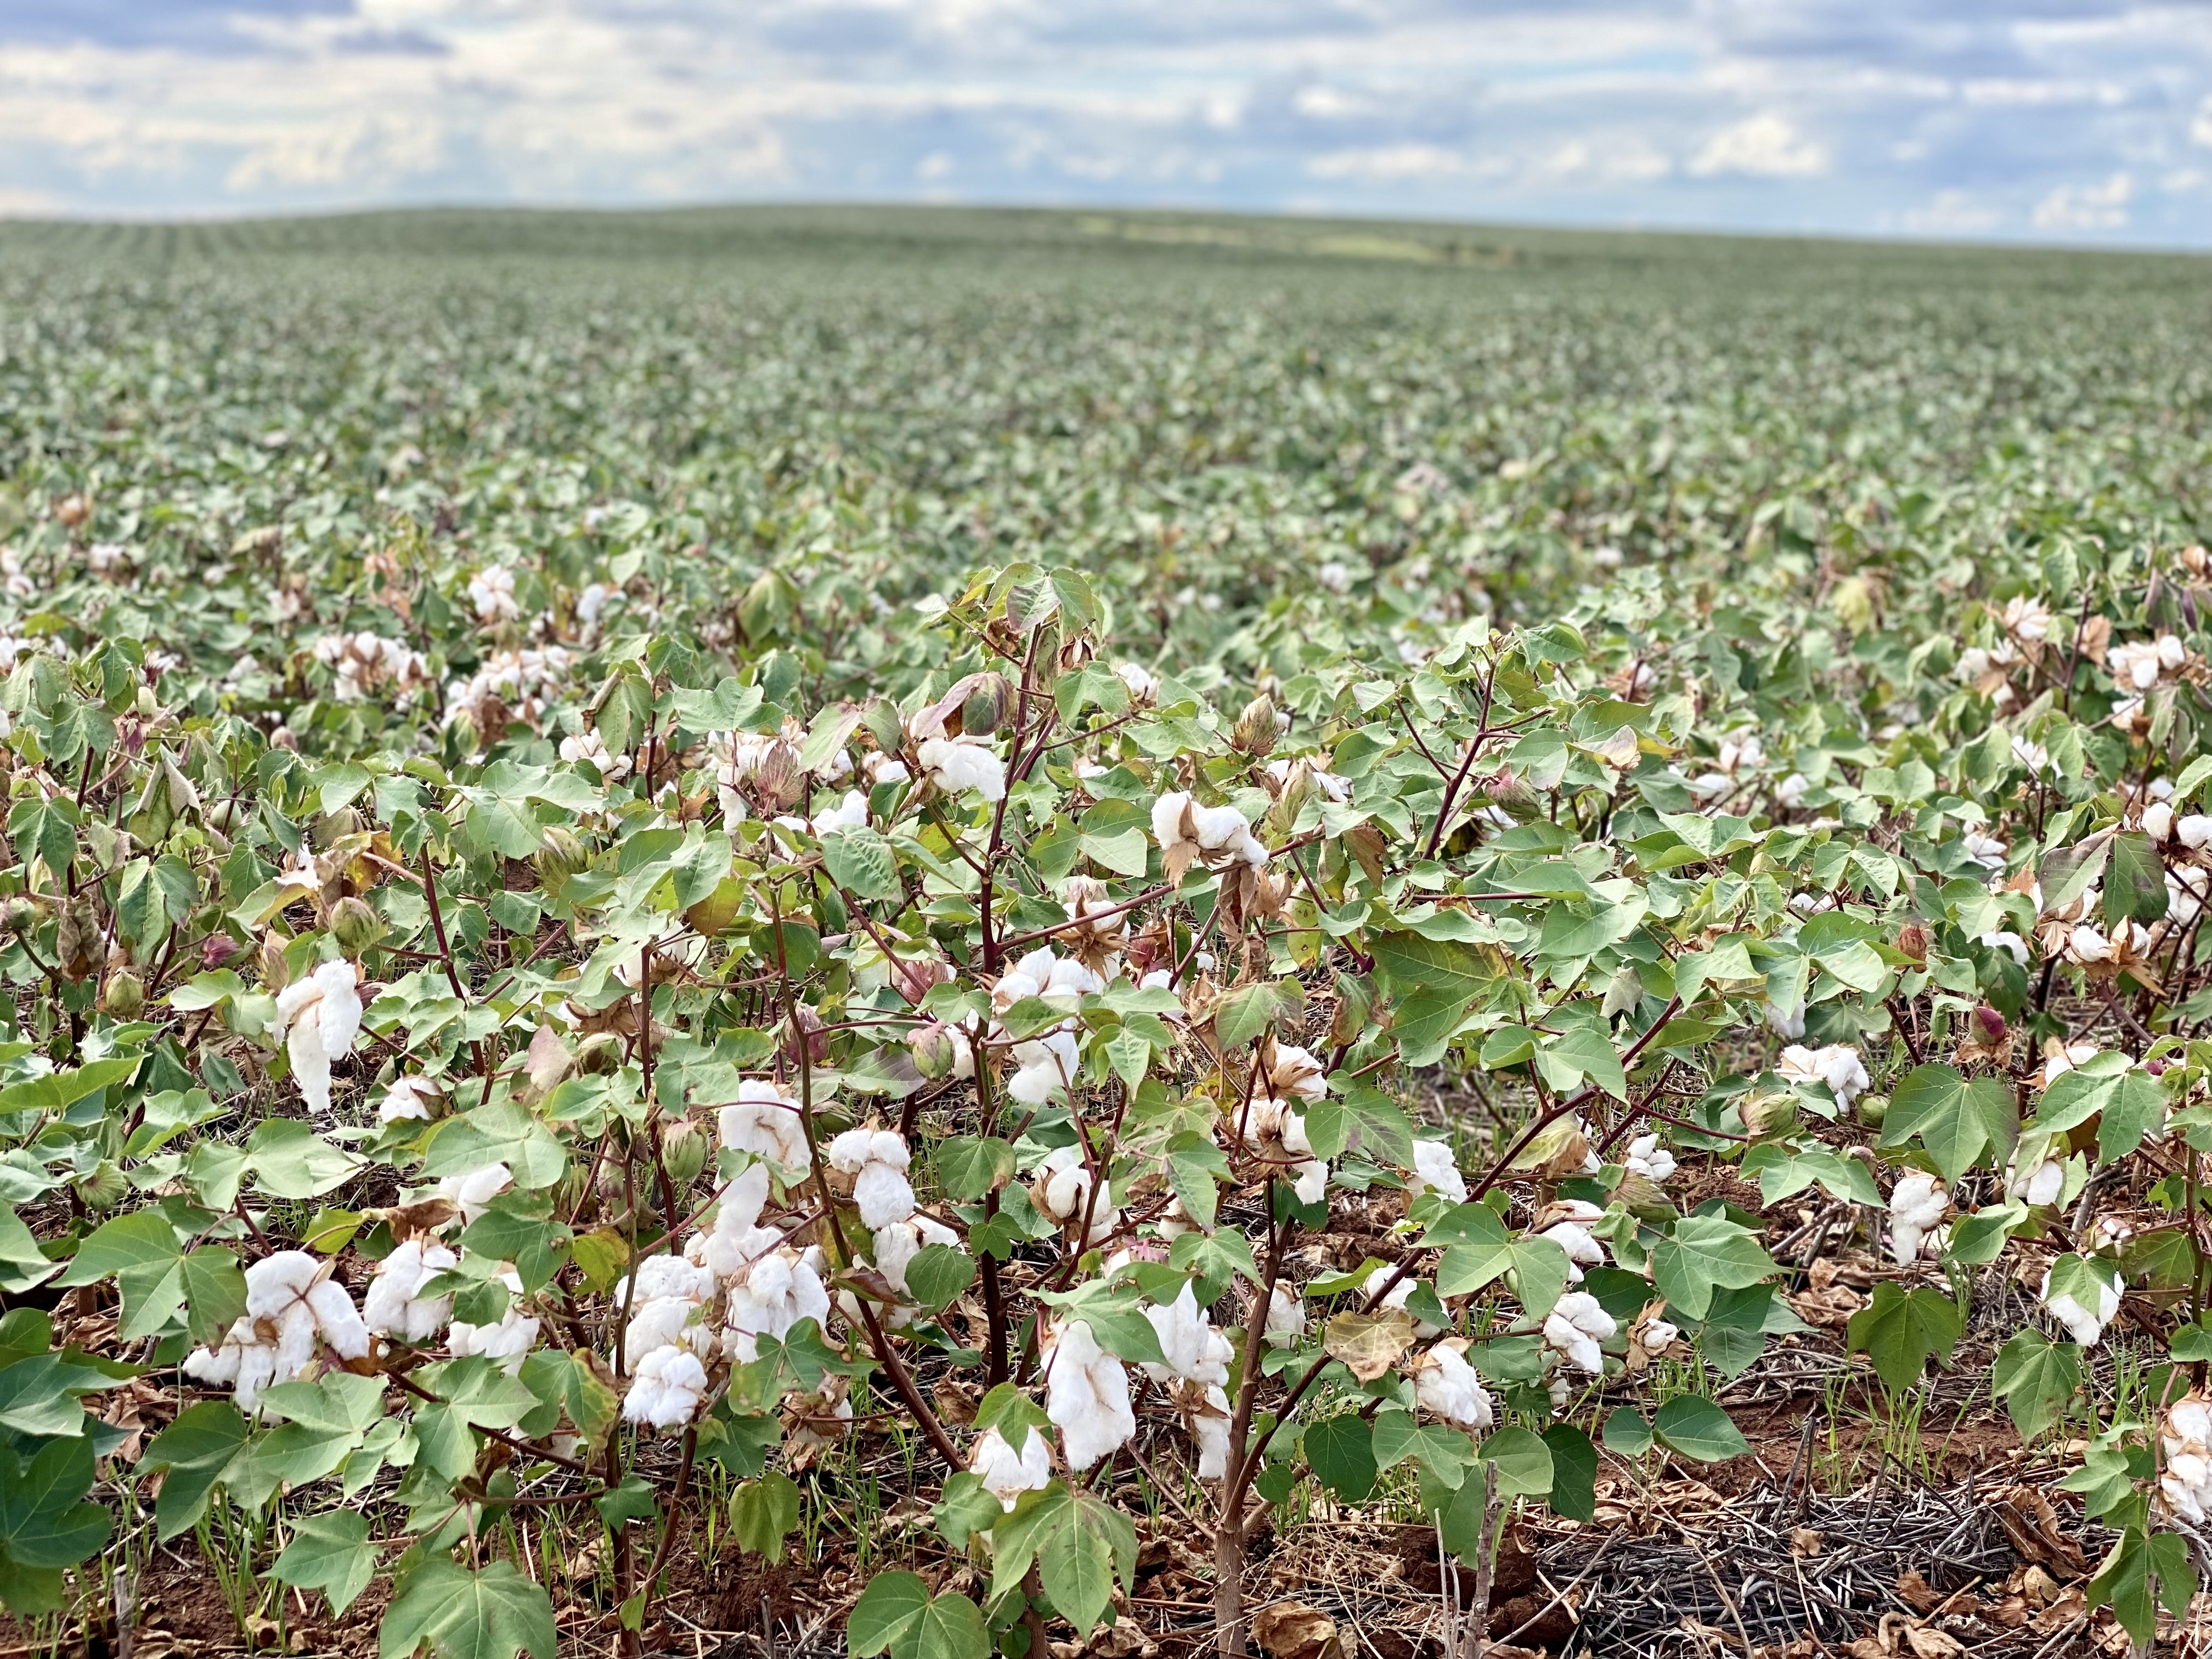 Oklahoma 2021 Cotton and Grain Sorghum Crops Predicted to be Well Above 2020 Harvest Stats